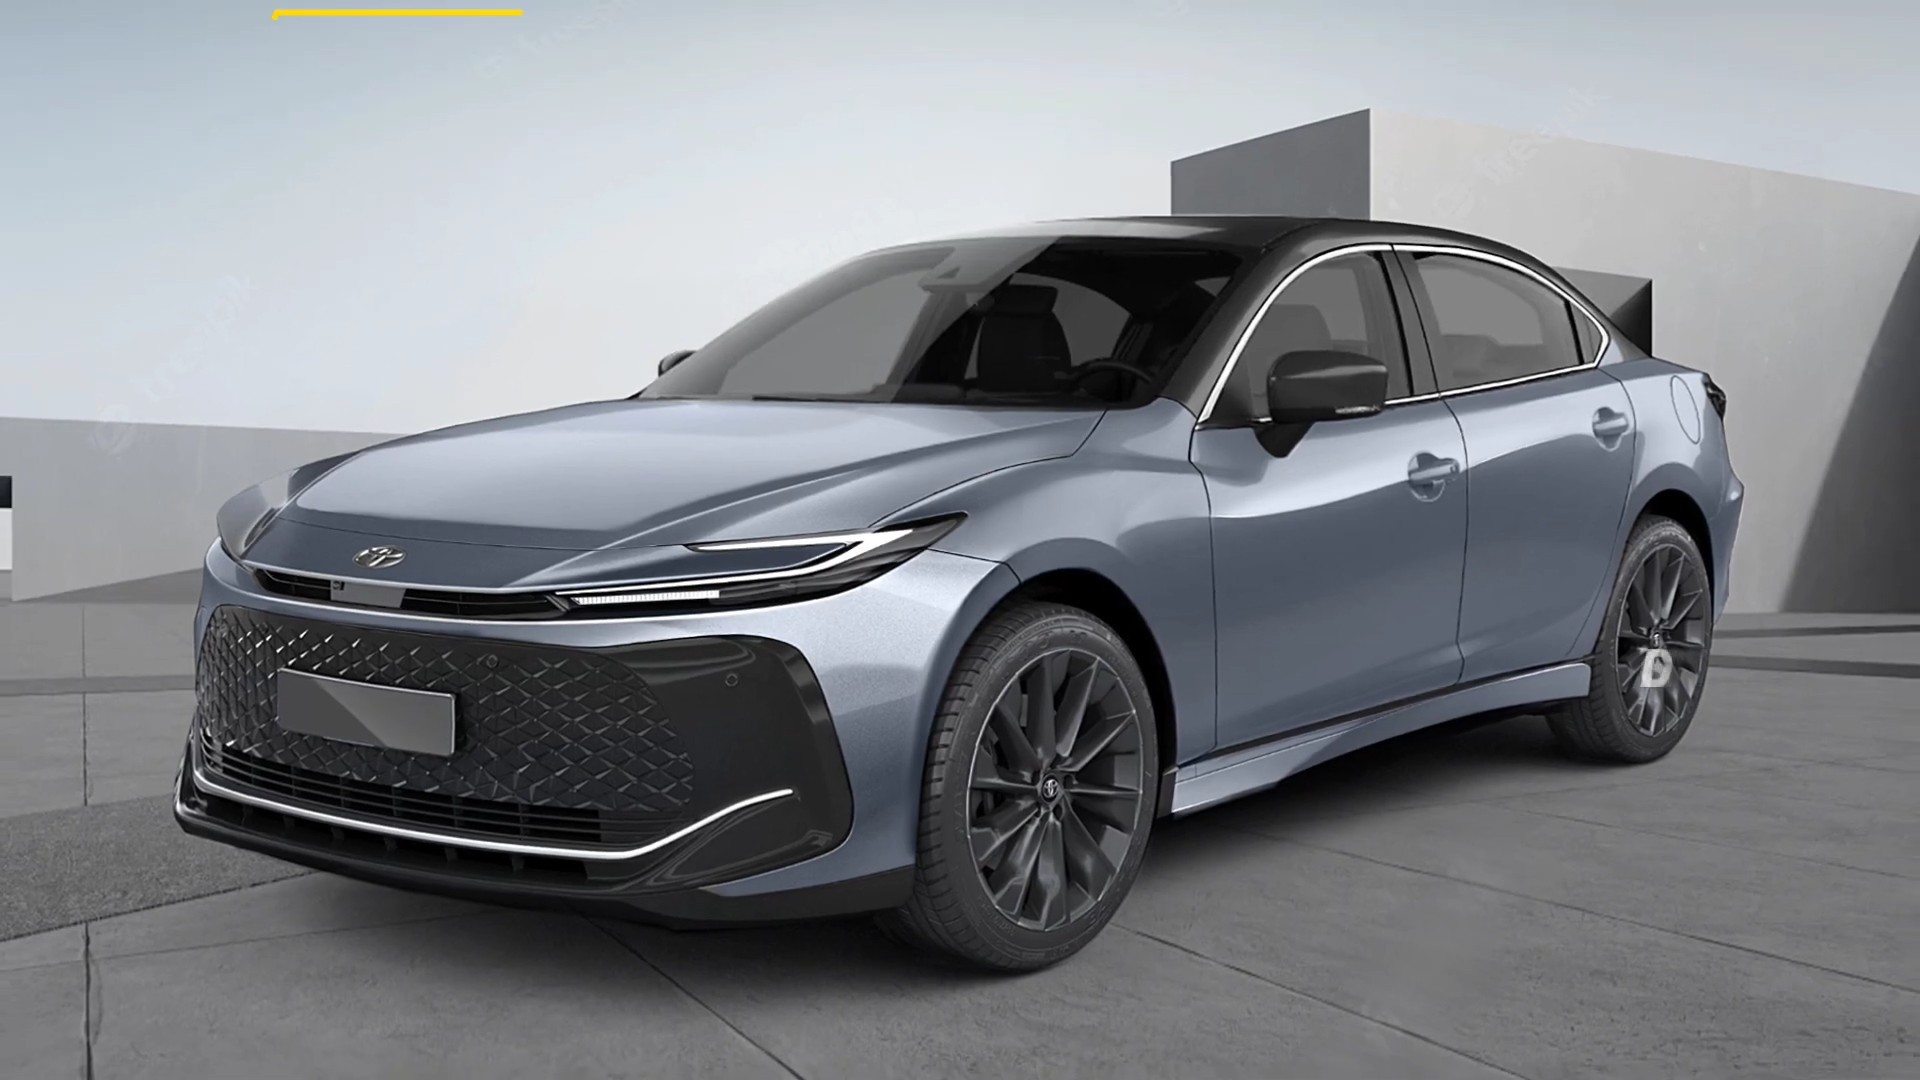 cgi-2024-toyota-camry-hev-takes-after-prius-rather-than-2023-crown-feels-sporty-3.jpg